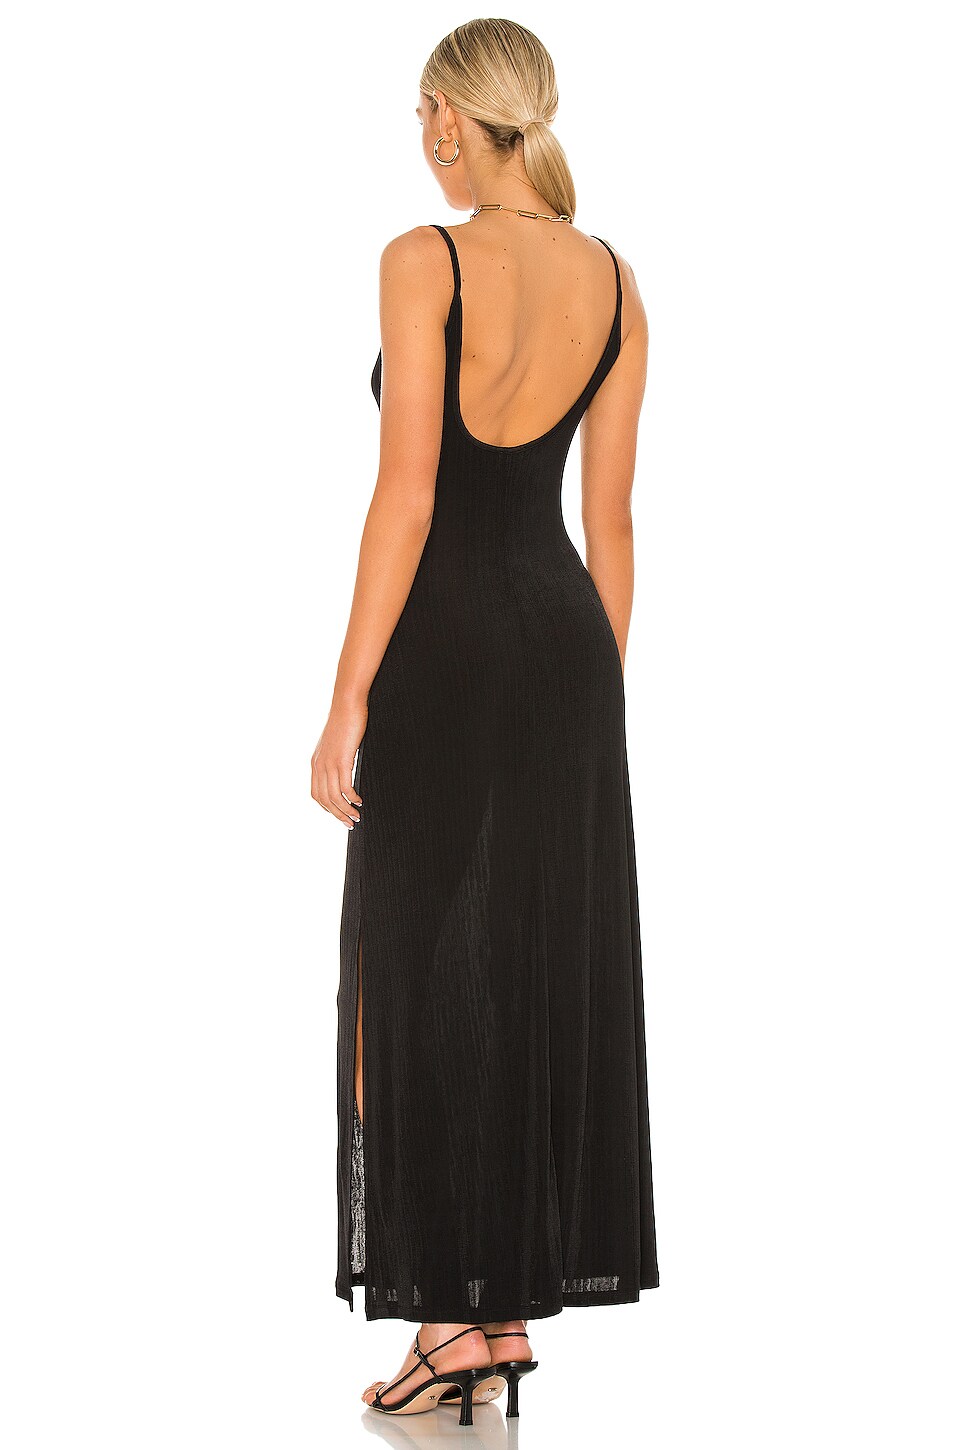 Free People Bare It All Bodycon Dress in Black | REVOLVE